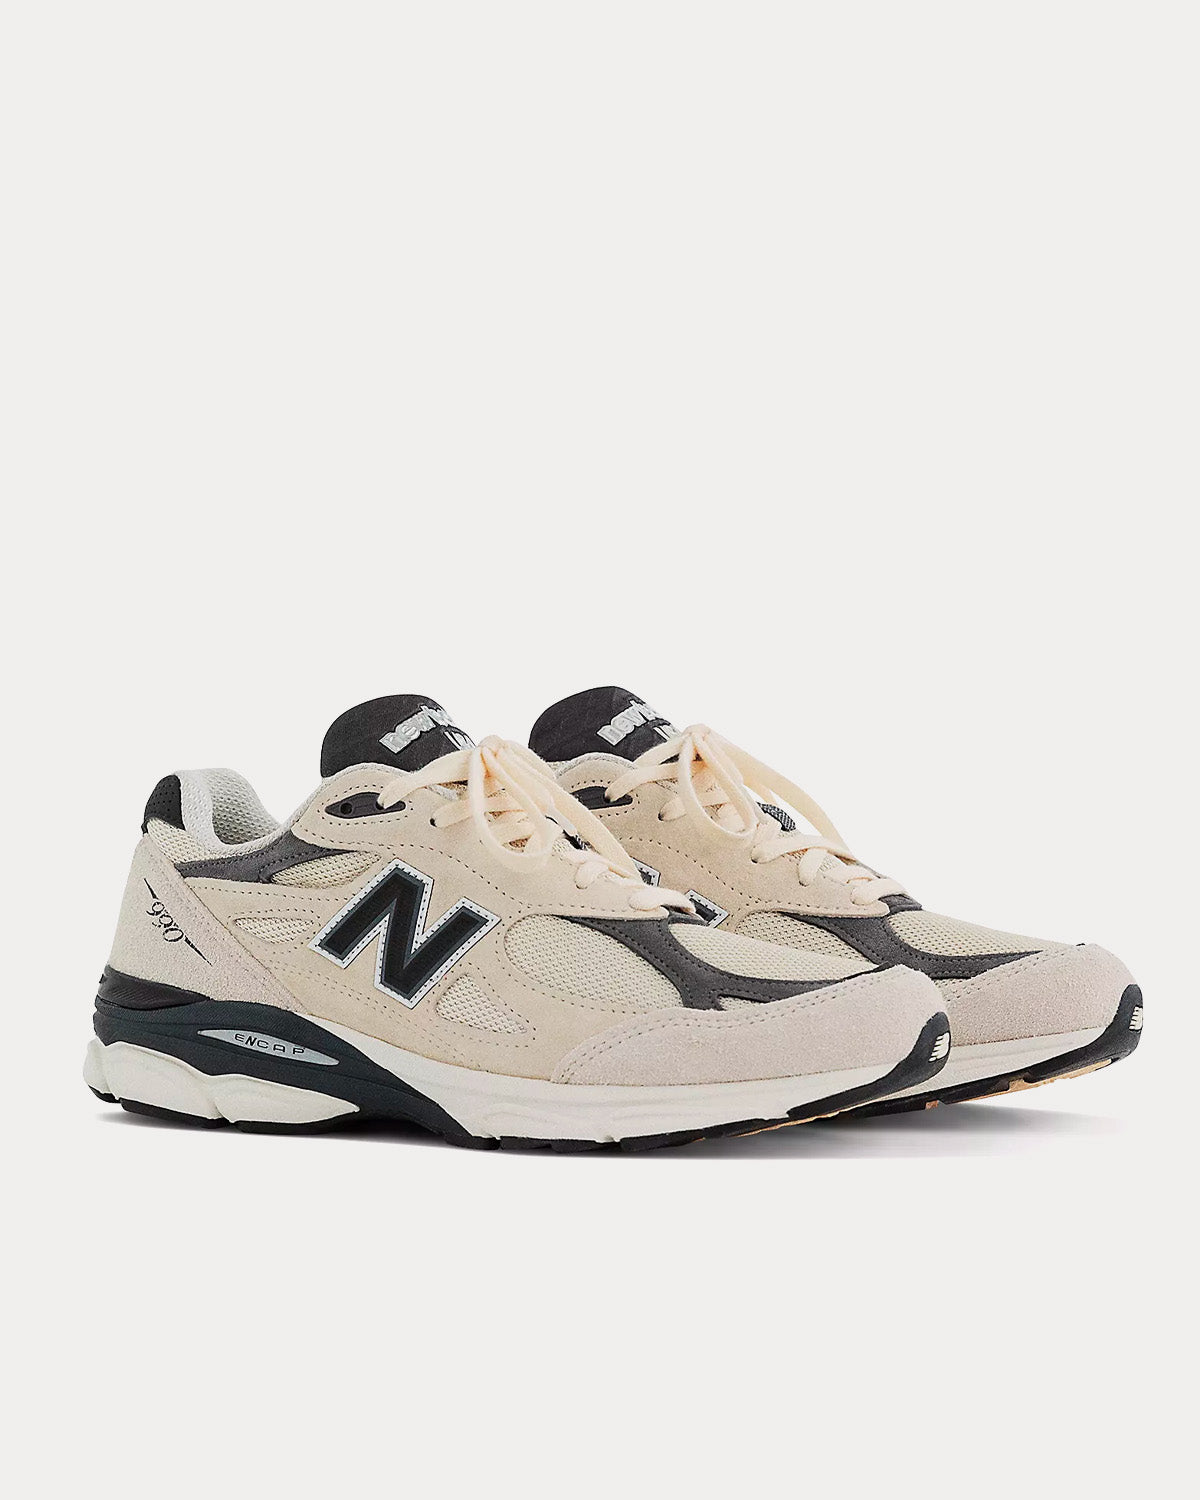 New Balance MADE in USA 990v3 Moonbeam with Macadamia Nut Low Top Sneakers  - Sneak in Peace